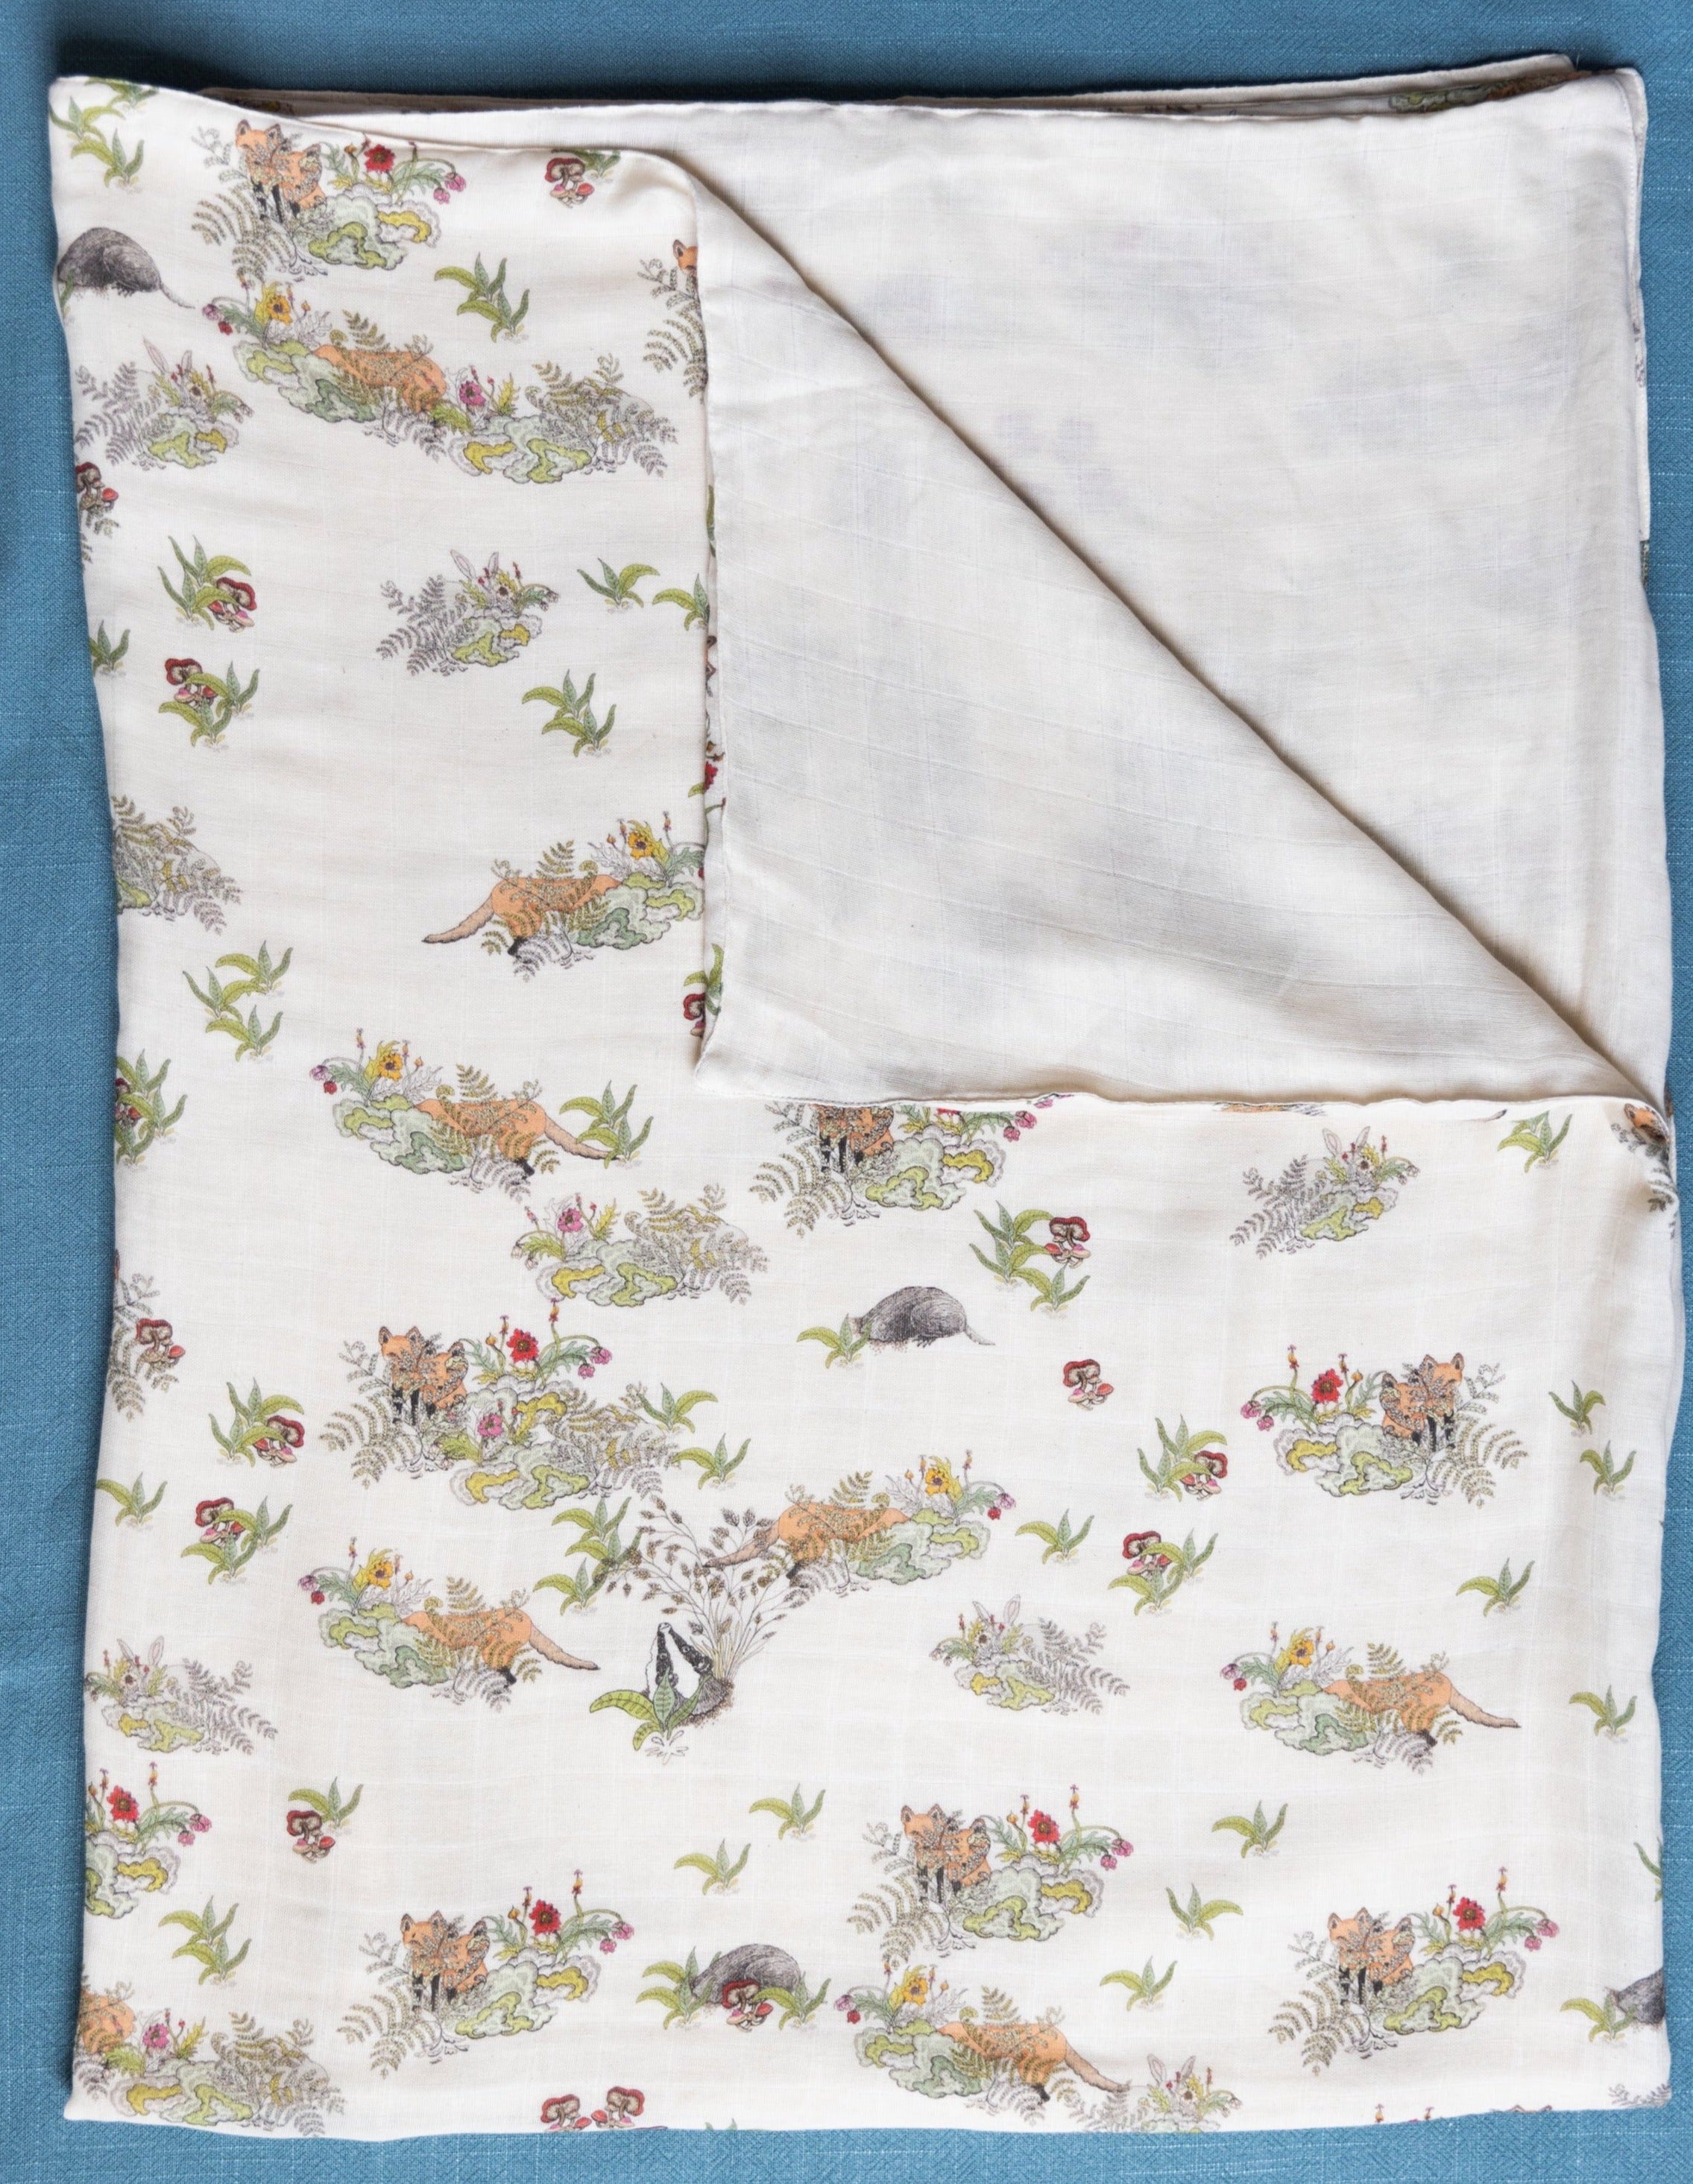 Soft Baby Muslin Swaddle with hiding foxes and rabbits by Forivor